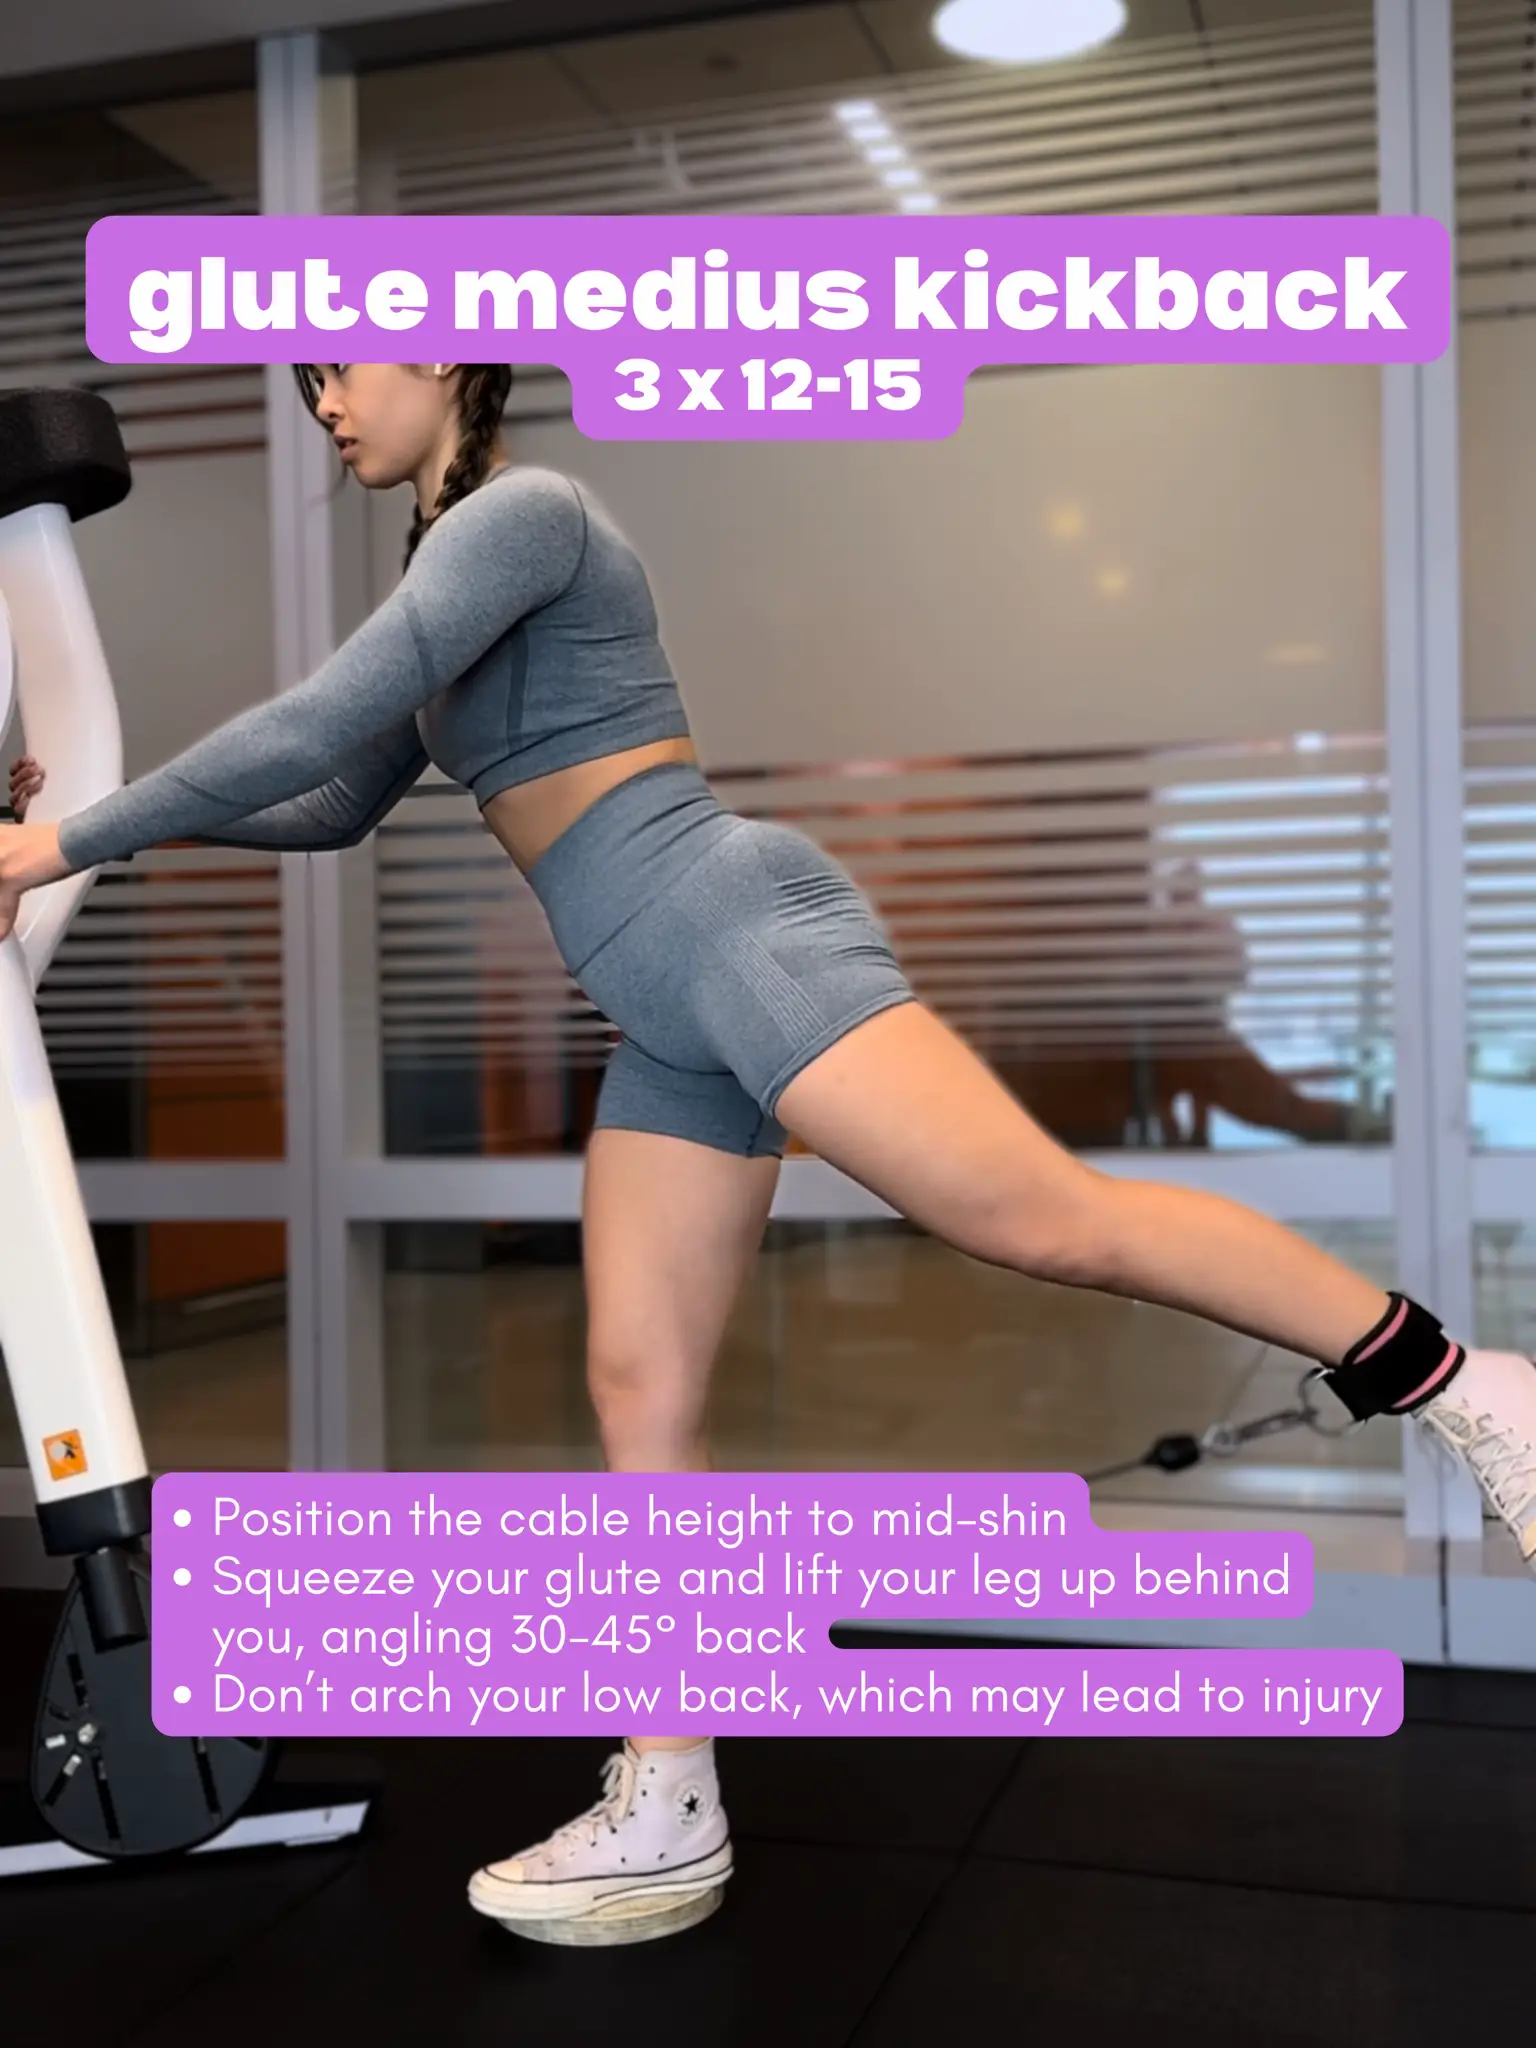 The complete guide to glute kickback – Fit Super-Humain